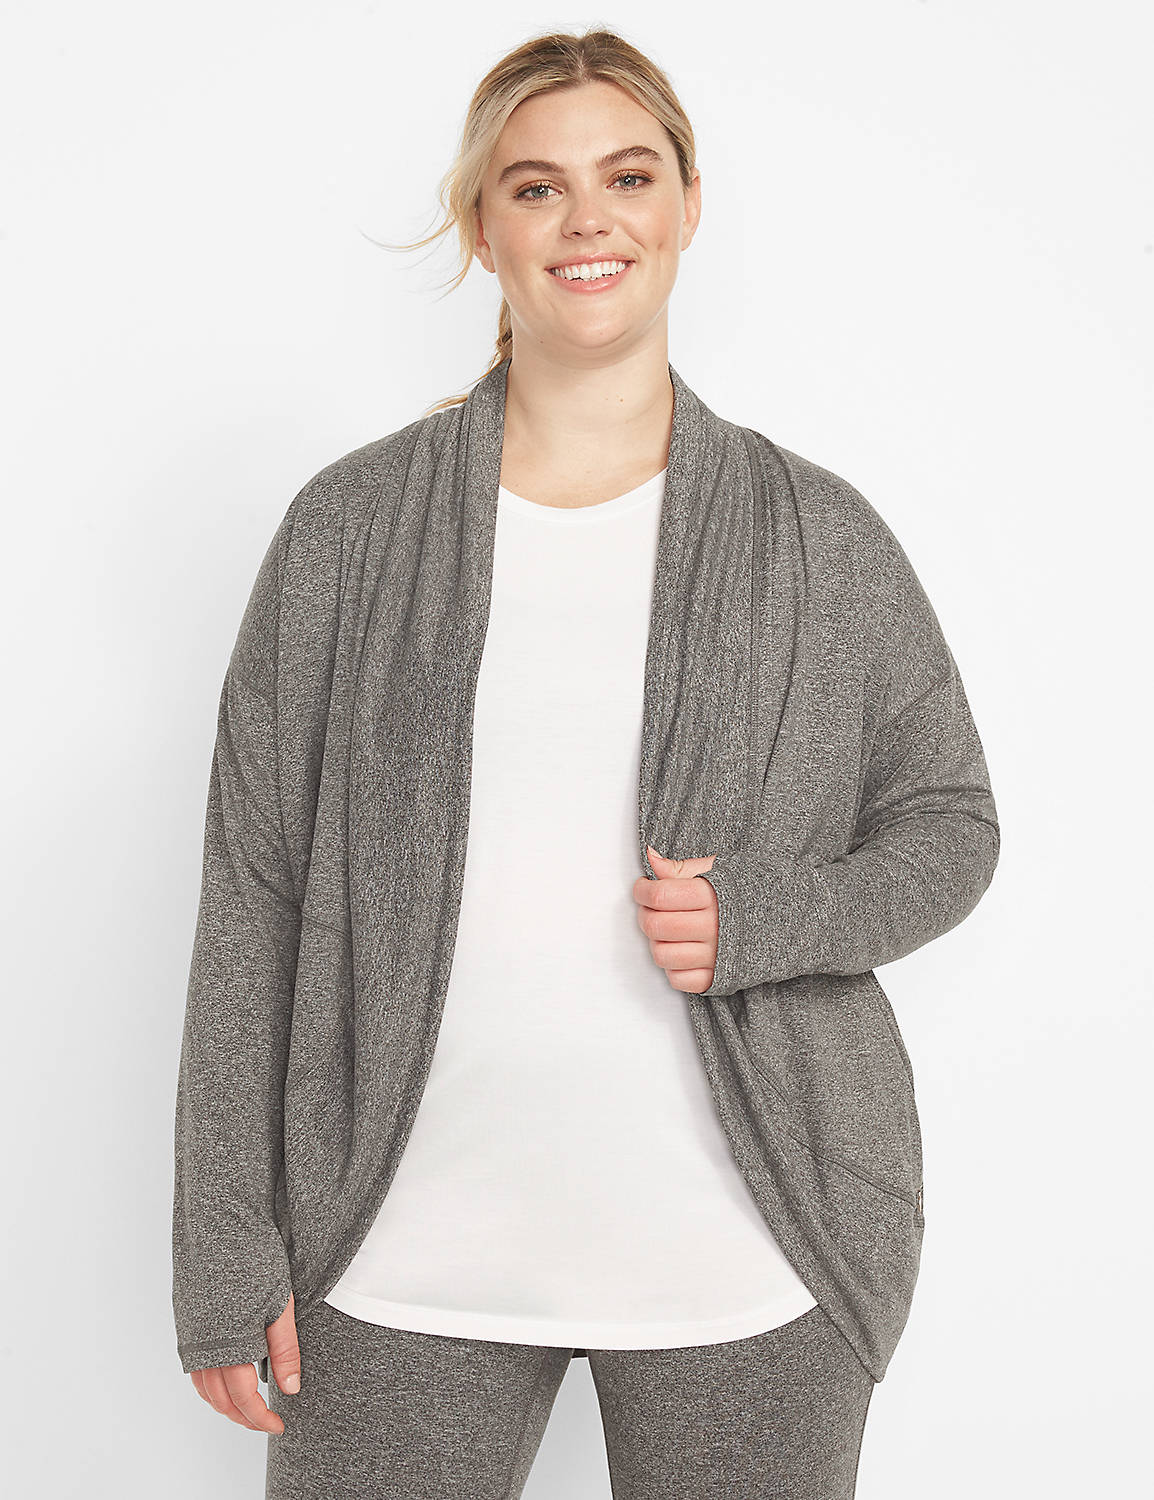 LIVI Soft Cocoon Overpiece - Marl Product Image 1